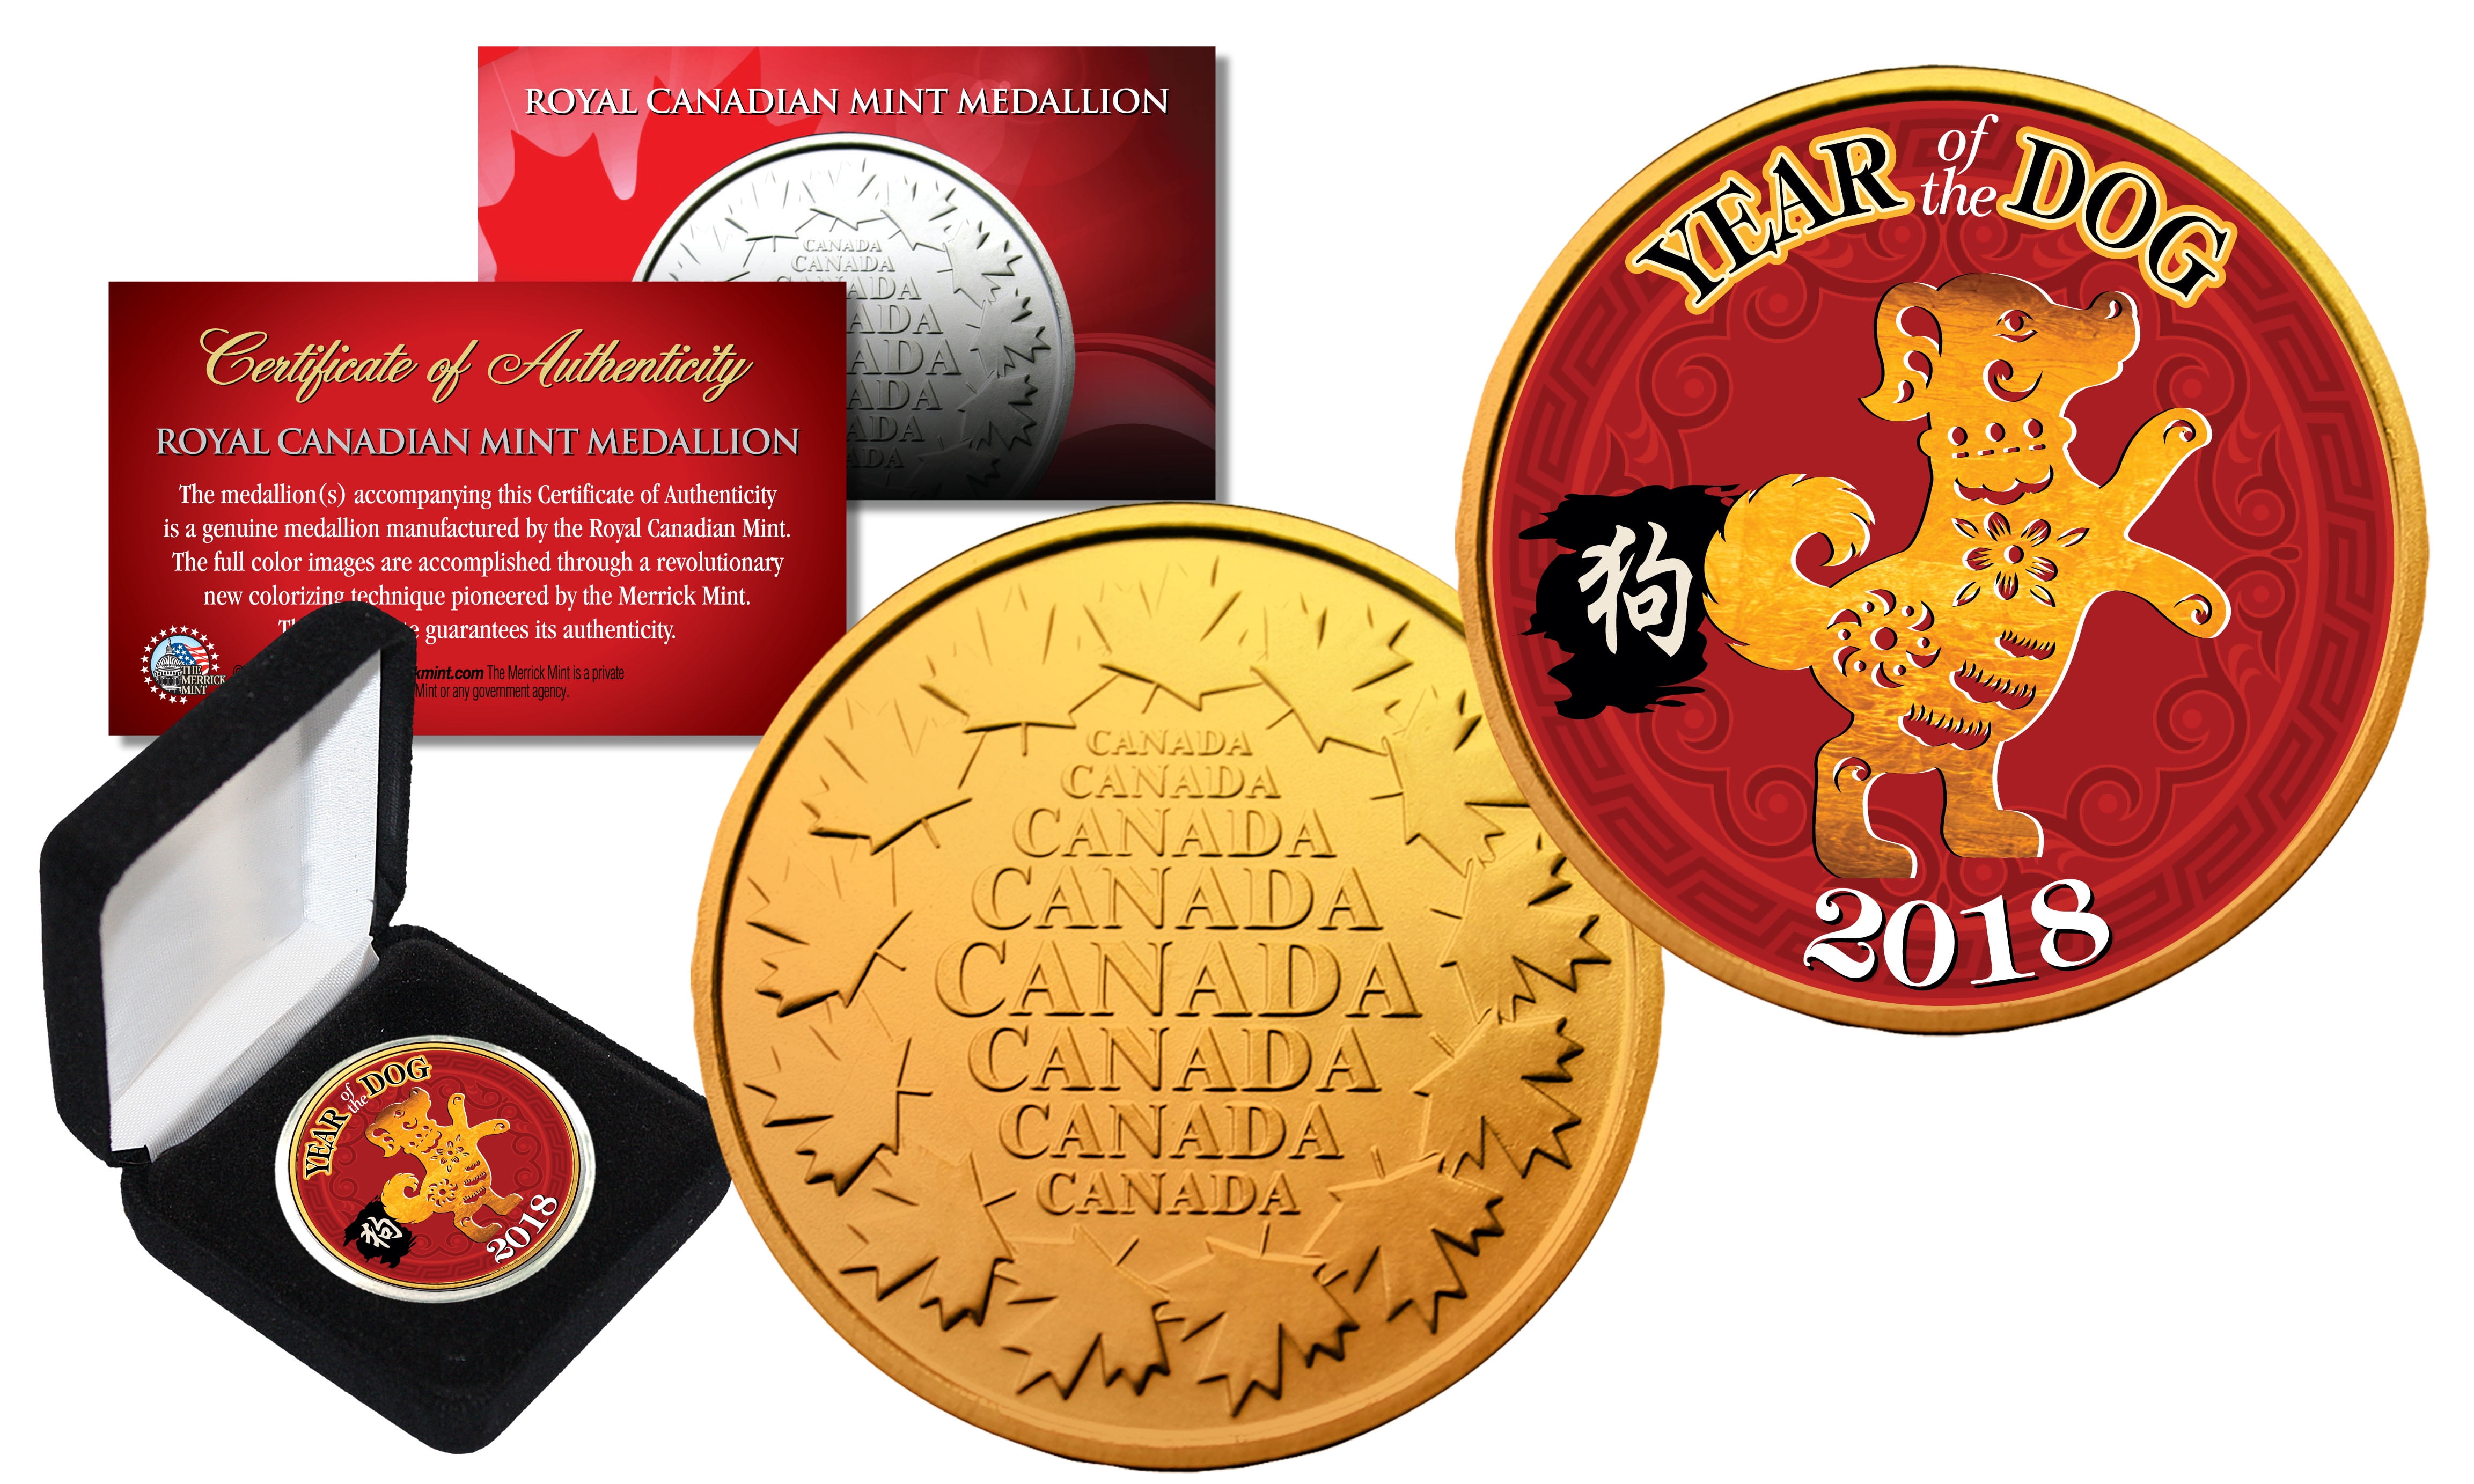 2018 Chinese New YEAR OF THE DOG Royal Canadian Mint RCM Medallion Coin with Box 